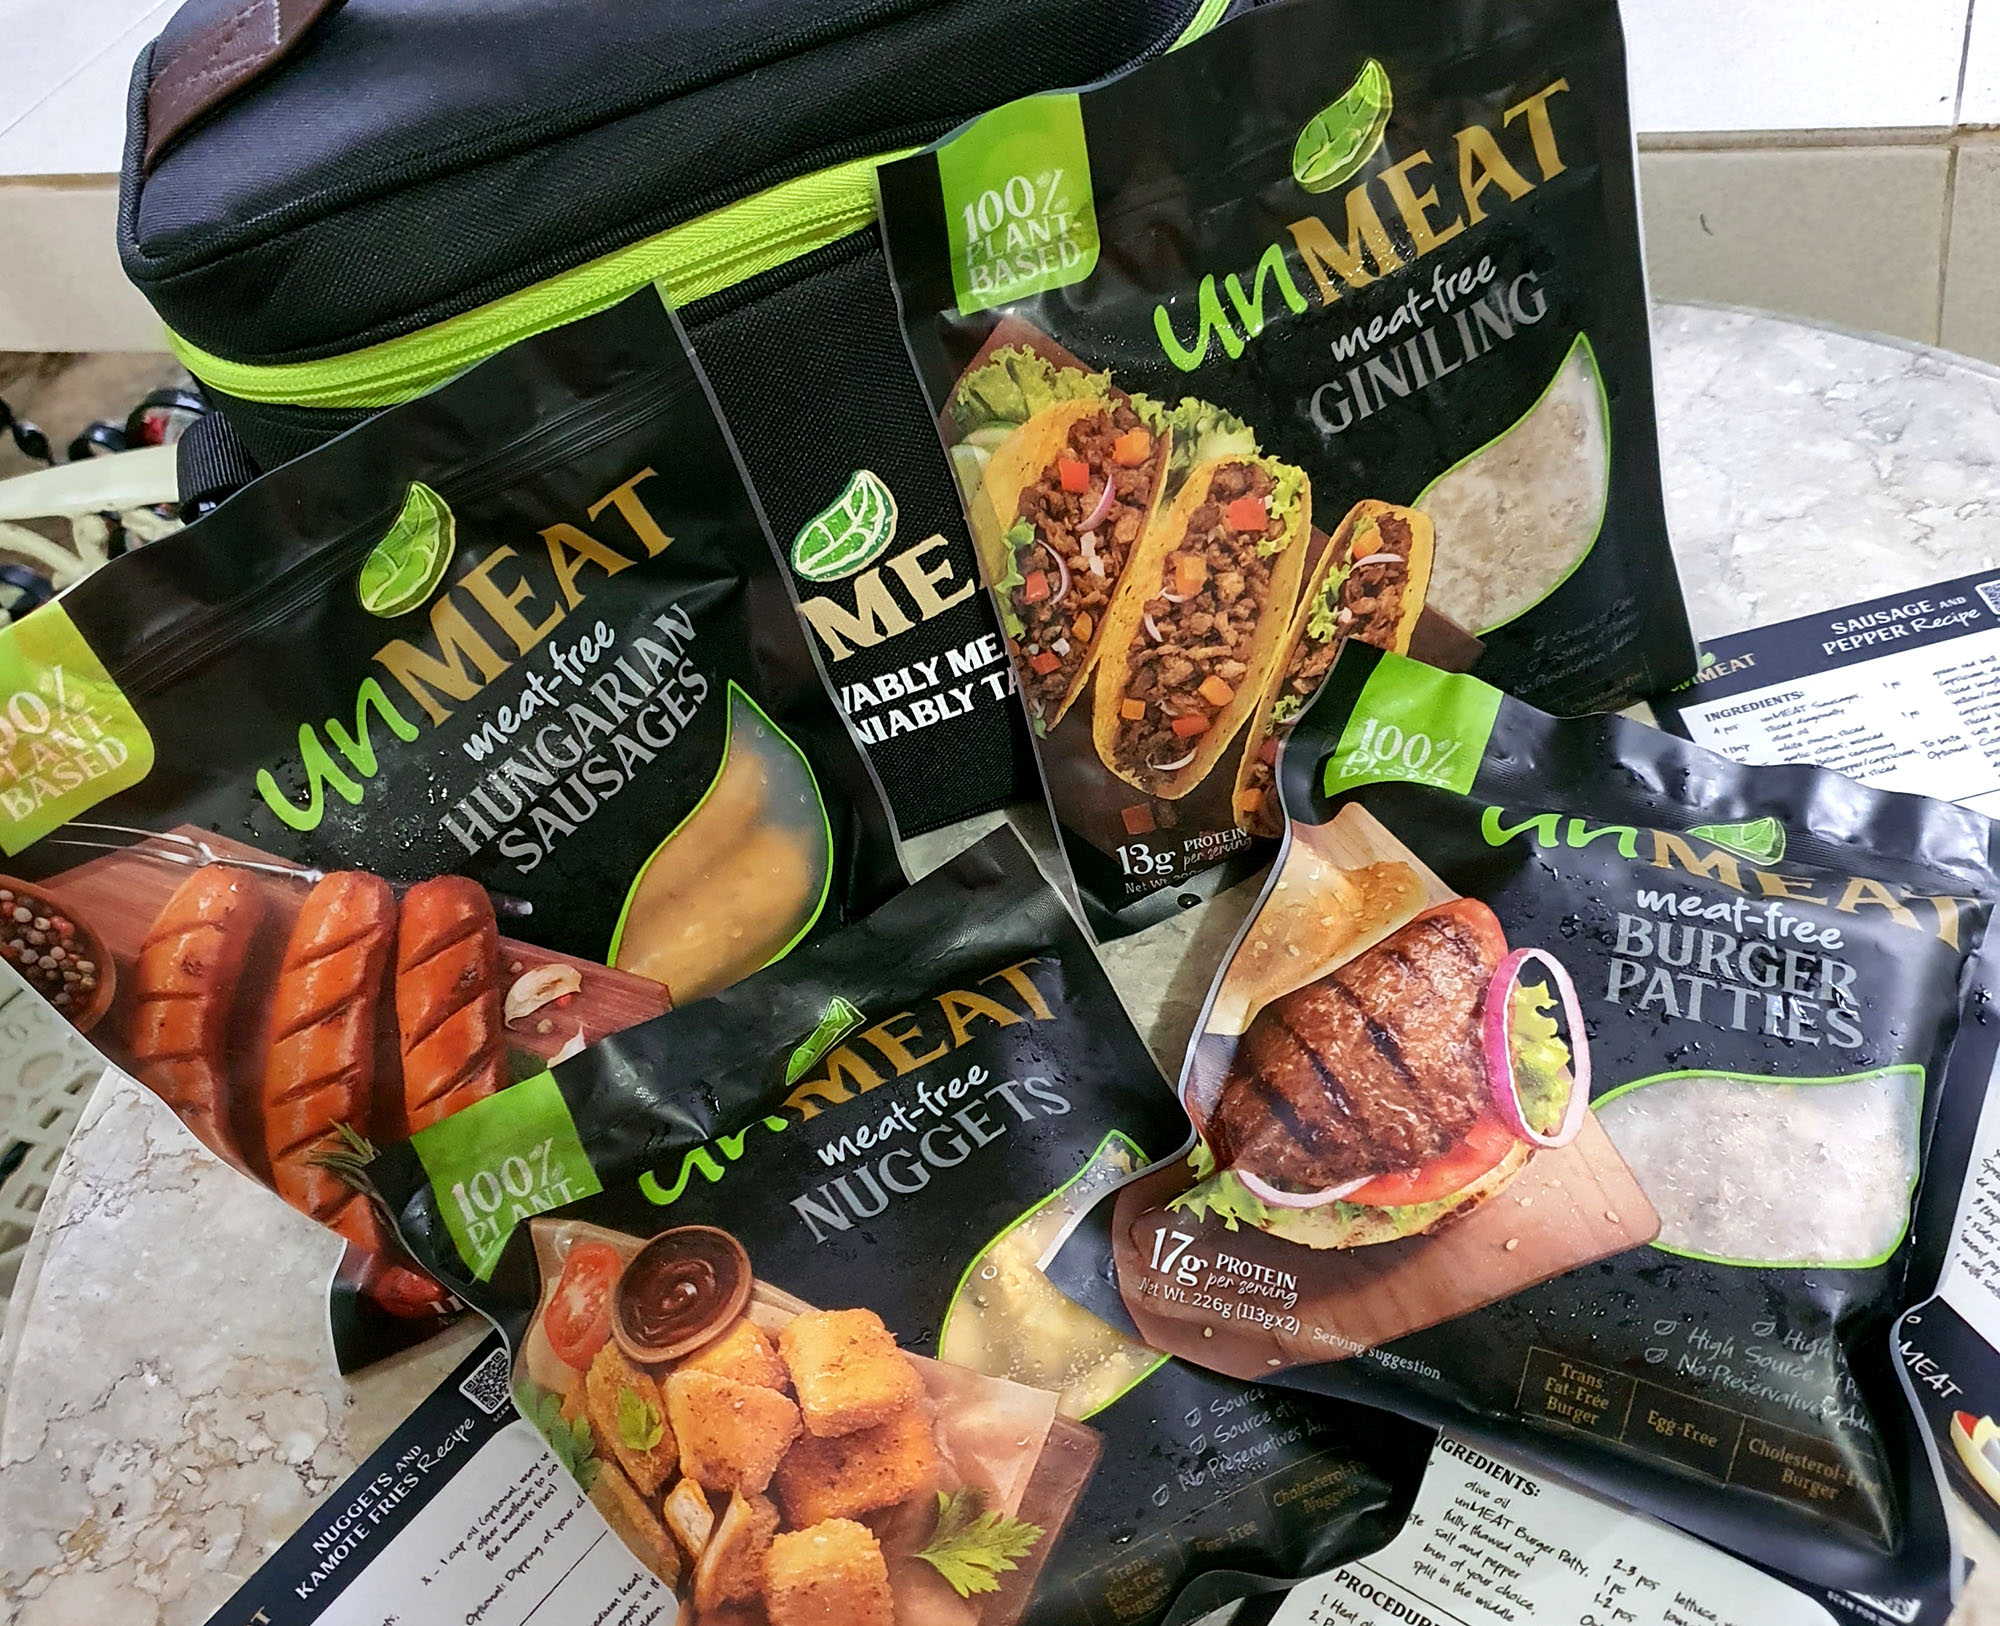 Introducing unMEAT 100% plant-based meat that looks, tastes and priced like real meat